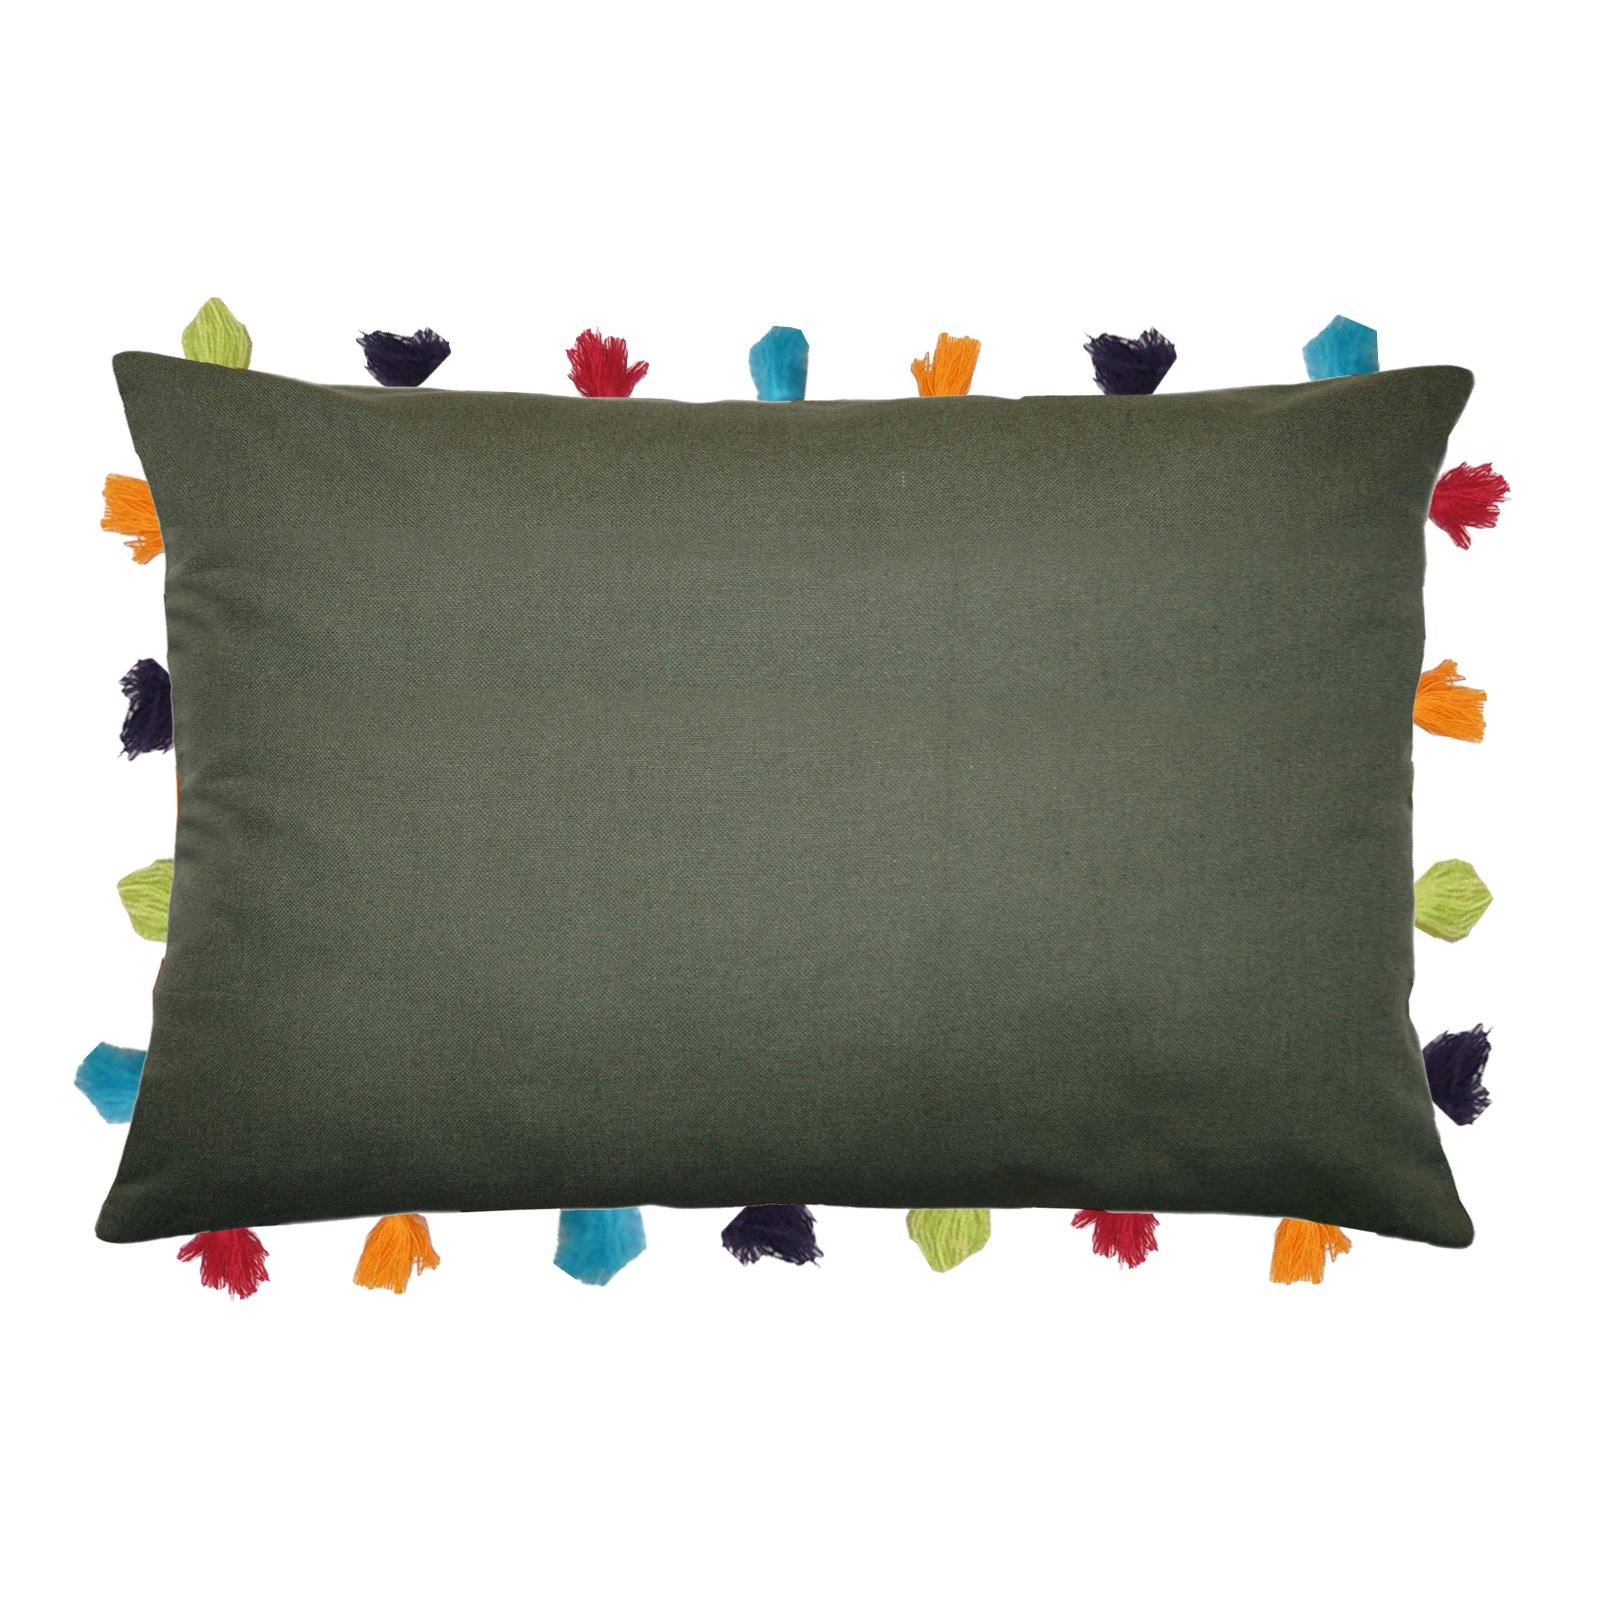 Lushomes Vineyard Green Cushion Cover with Colorful tassels (Single pc, 14 x 20”) - Lushomes